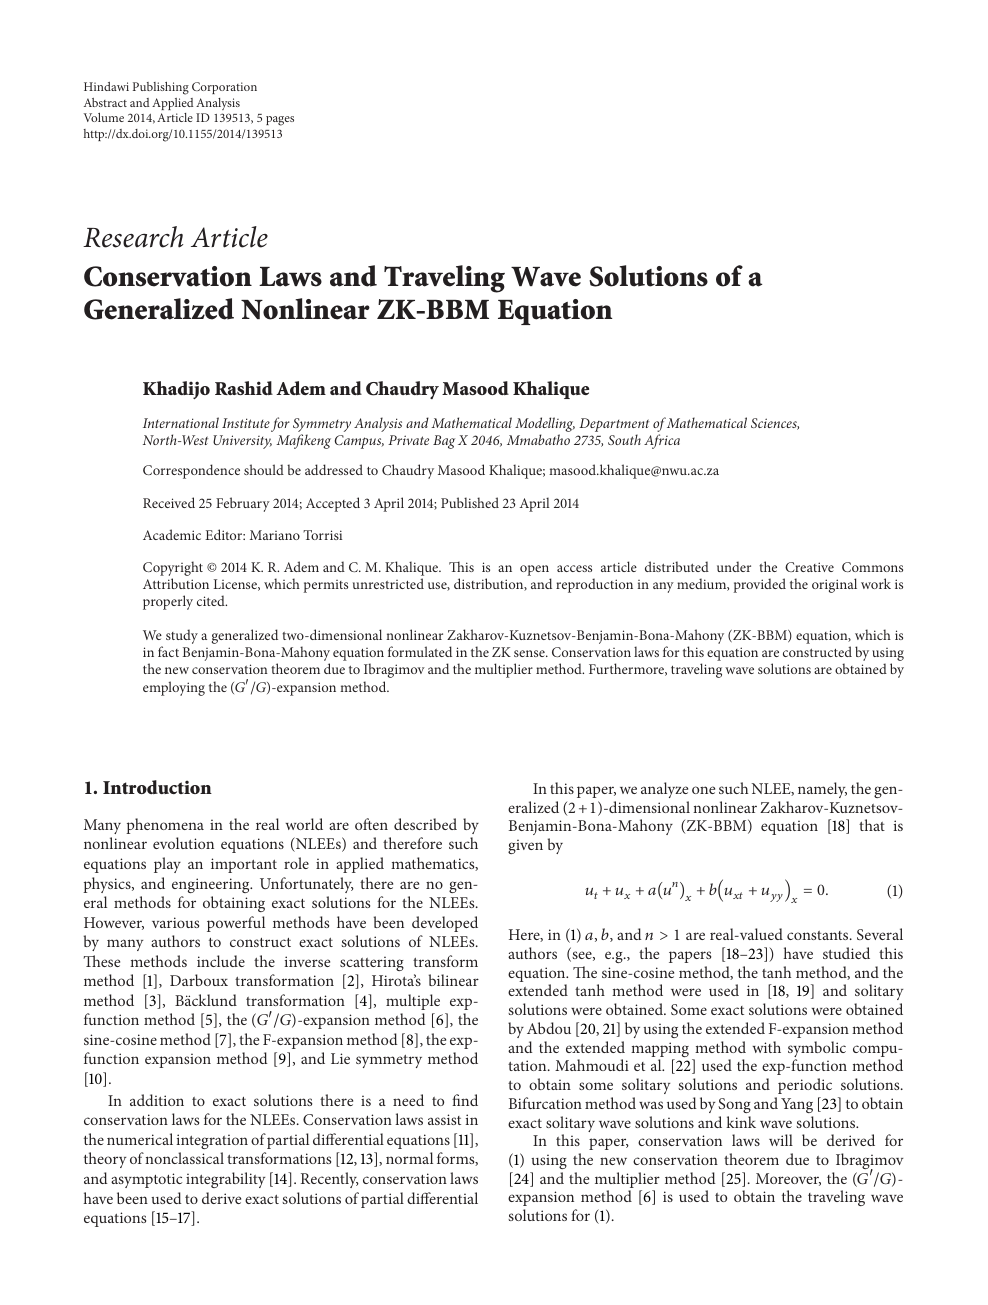 Conservation Laws And Traveling Wave Solutions Of A Generalized Nonlinear Zk m Equation Topic Of Research Paper In Mathematics Download Scholarly Article Pdf And Read For Free On Cyberleninka Open Science Hub